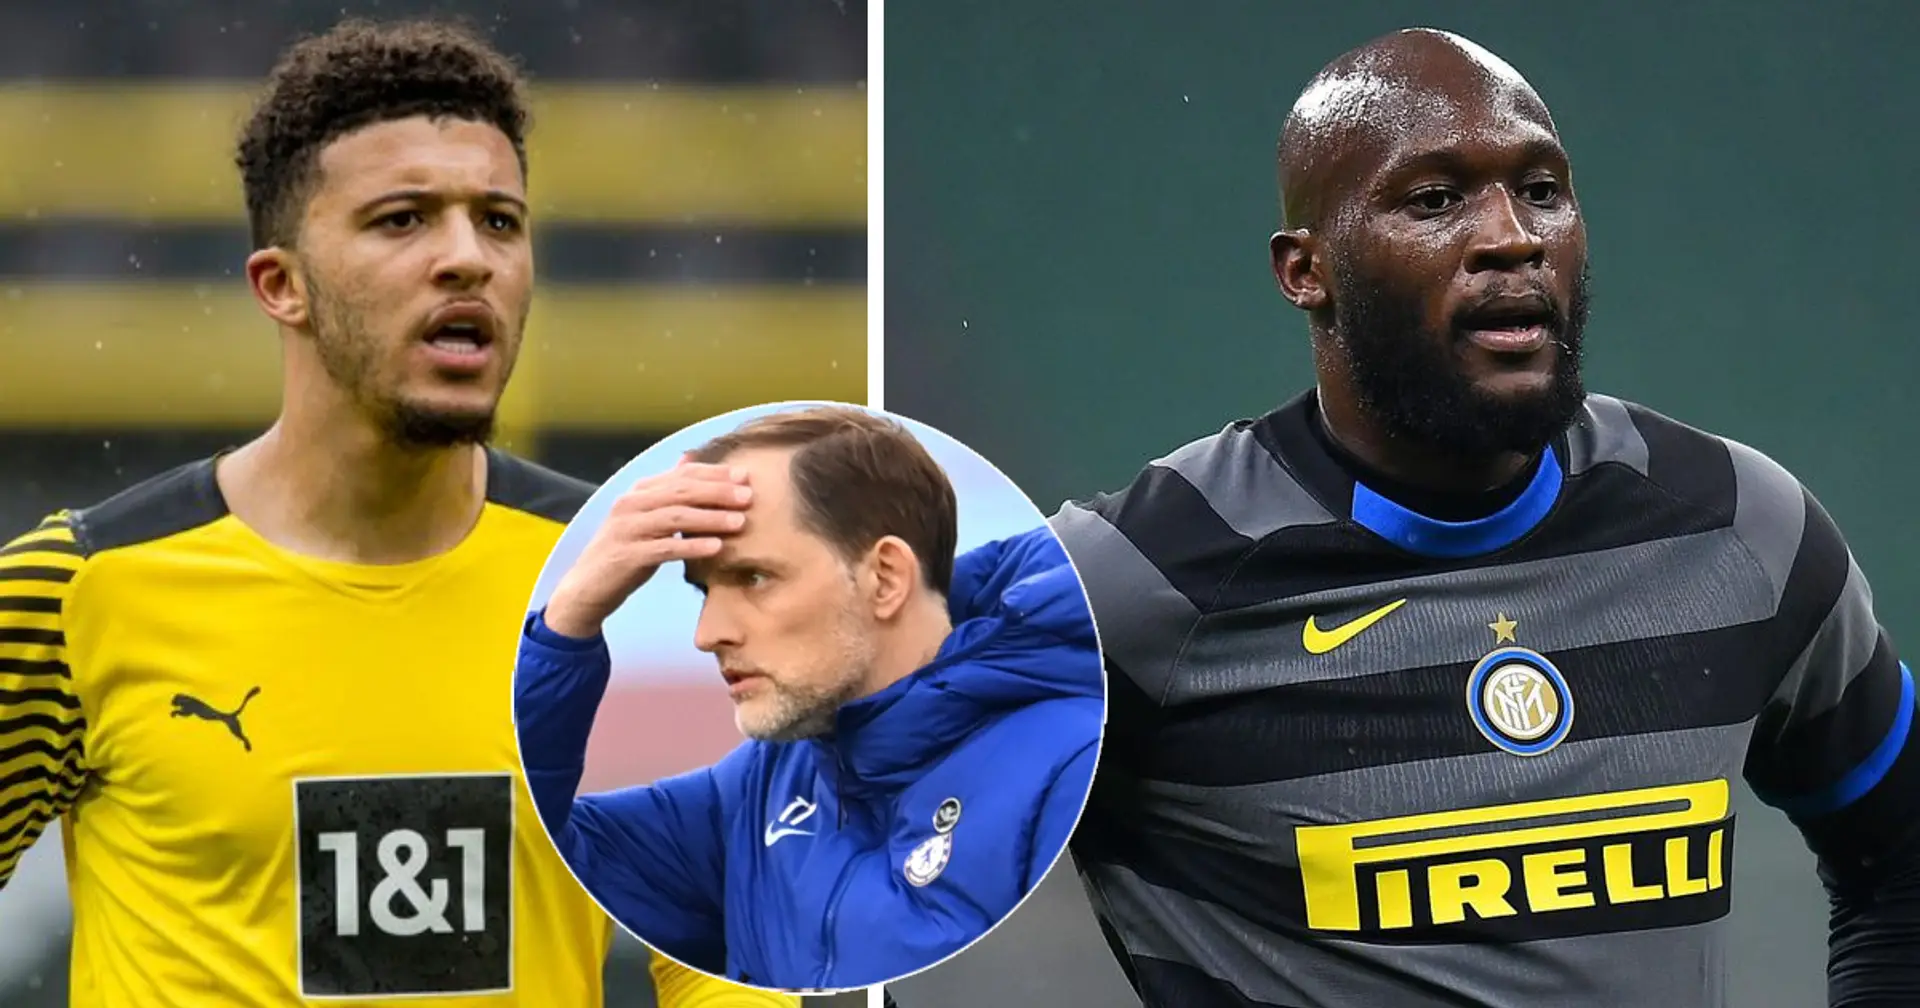 Lukaku to Chelsea & 4 more transfer rumours you should believe the least now